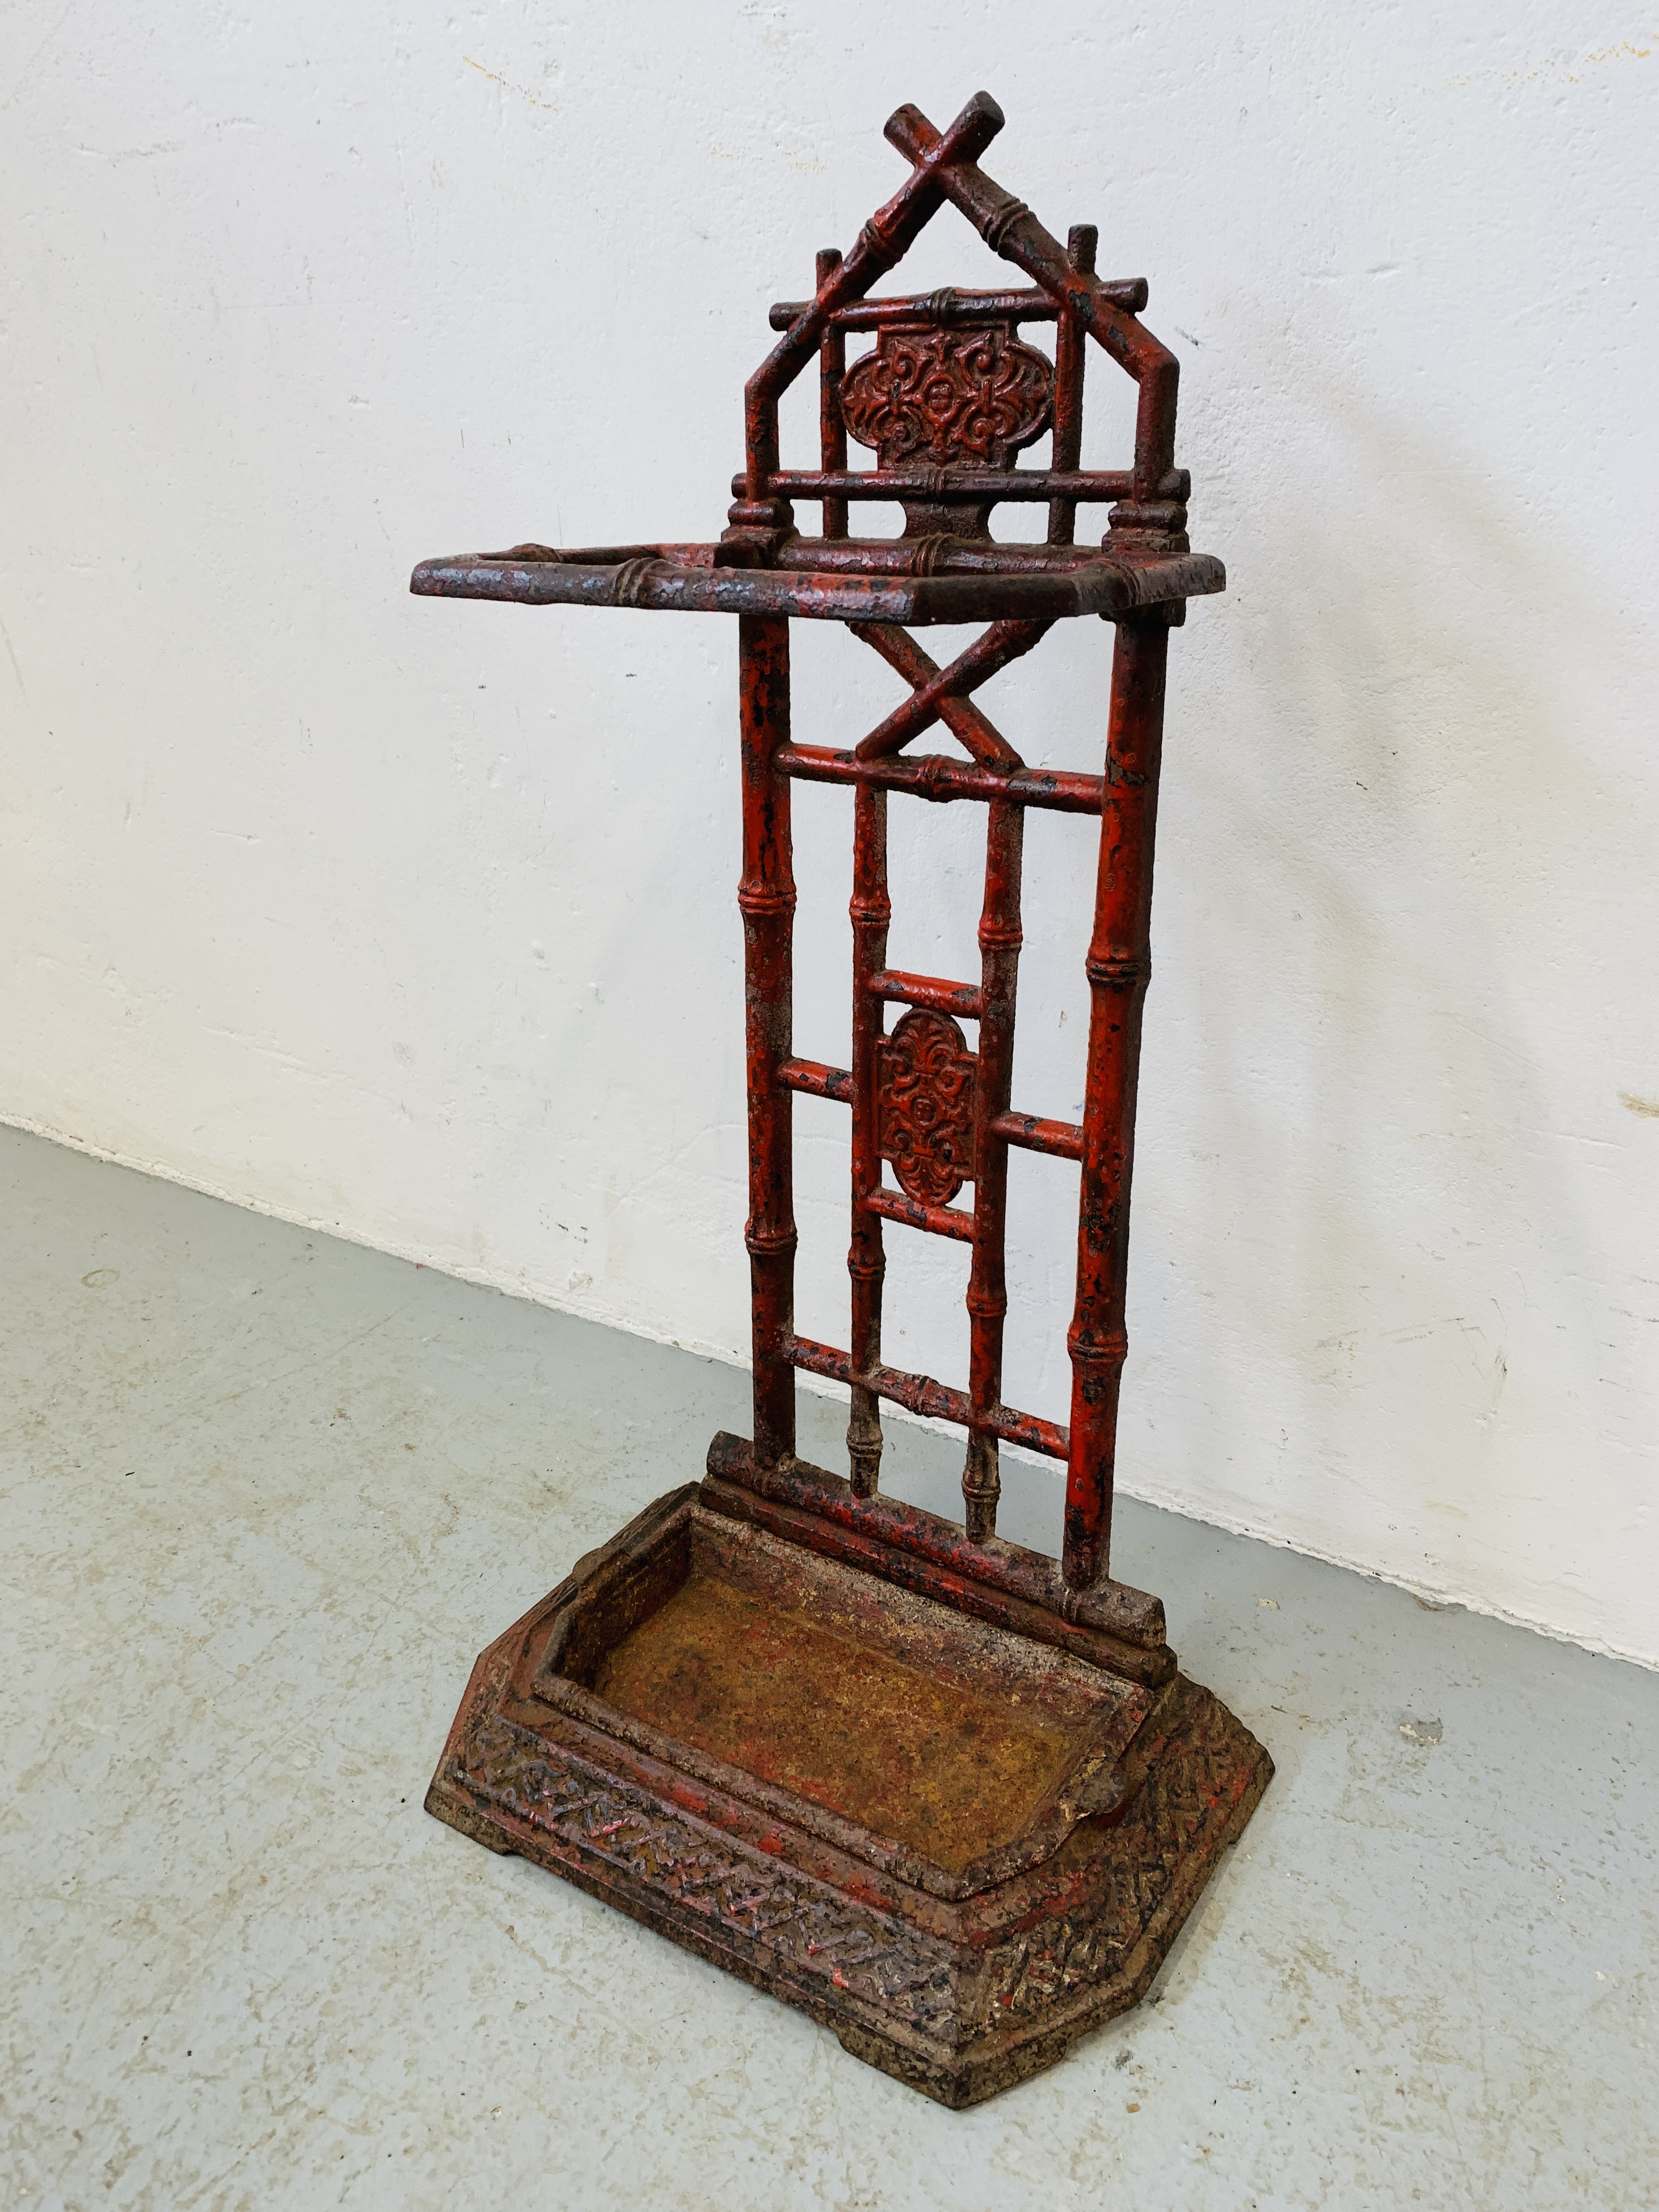 ANTIQUE CAST IRON UMBRELLA STAND - BAMBOO DESIGN (FLAKED RED PAINT) H 70CM. - Image 6 of 6